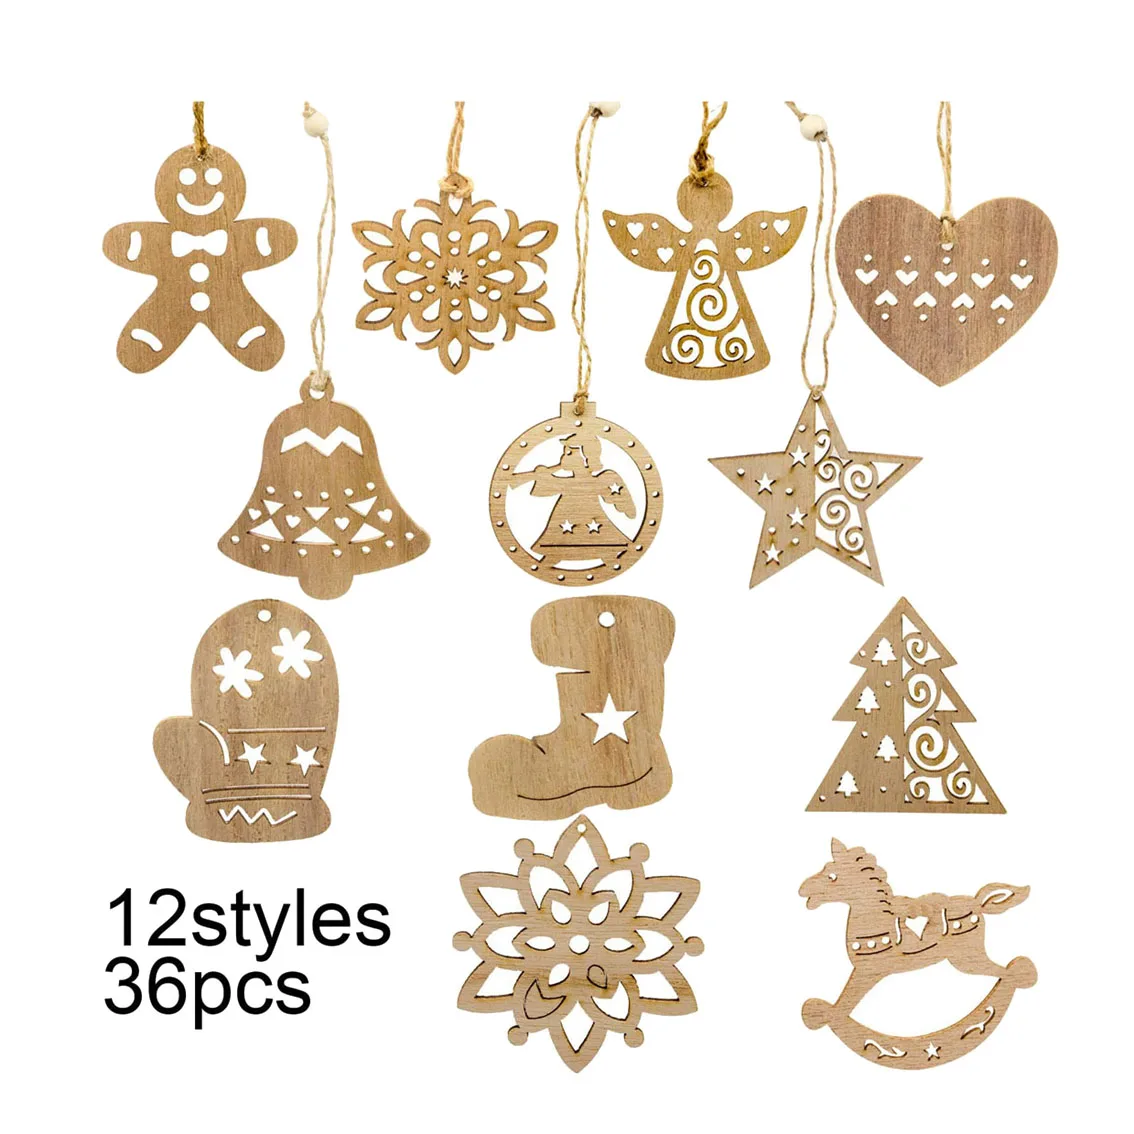 Wood mdf christmas baubles present craft shapes blanks decoration 5 sizes